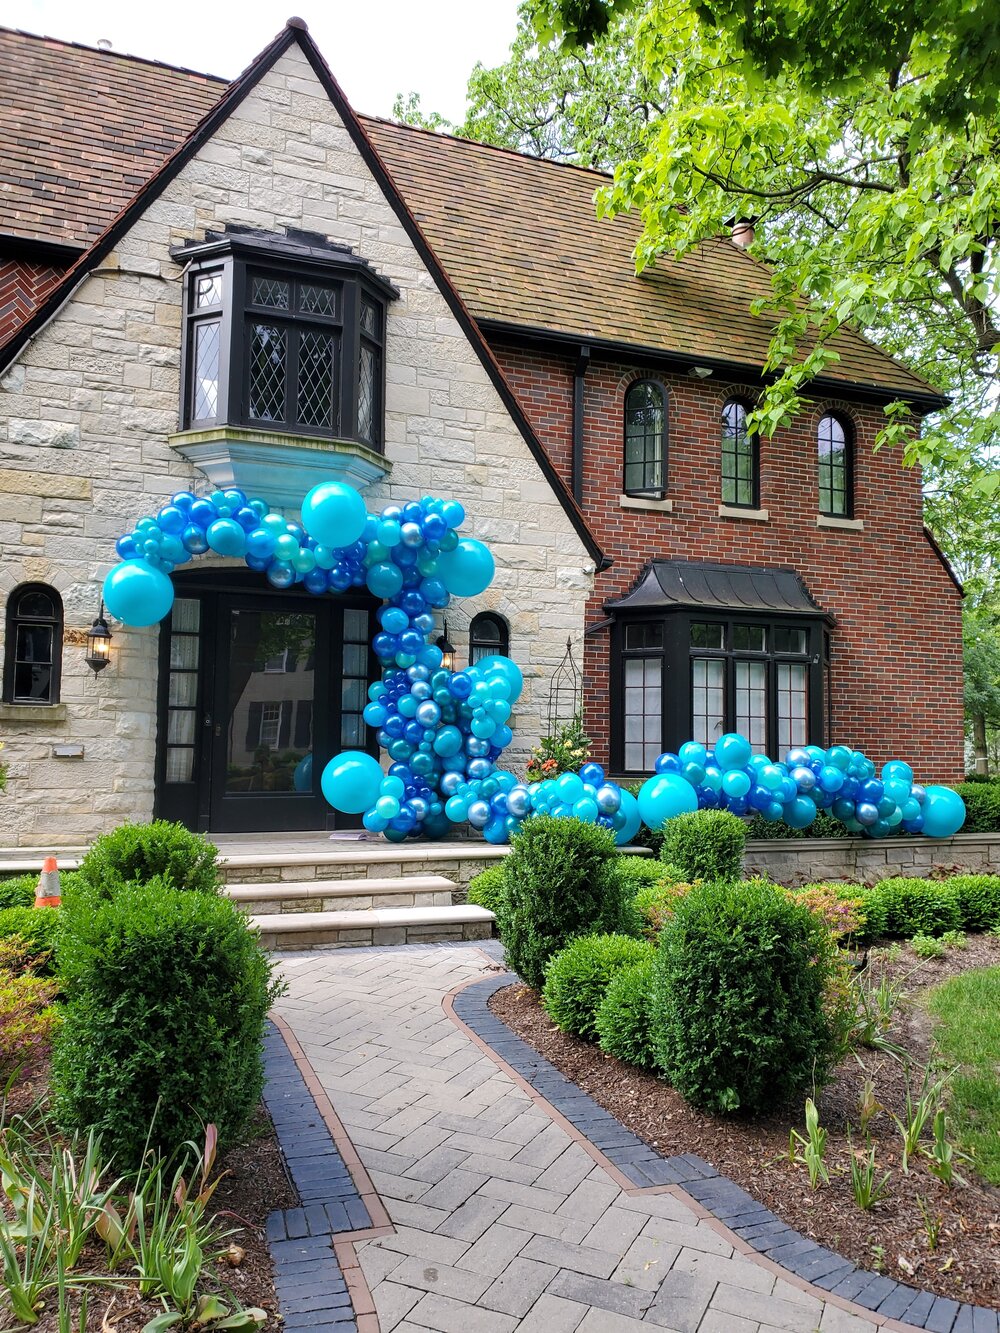 Proposal Balloon Decor | Personalized Decoration For Events – 99 ...